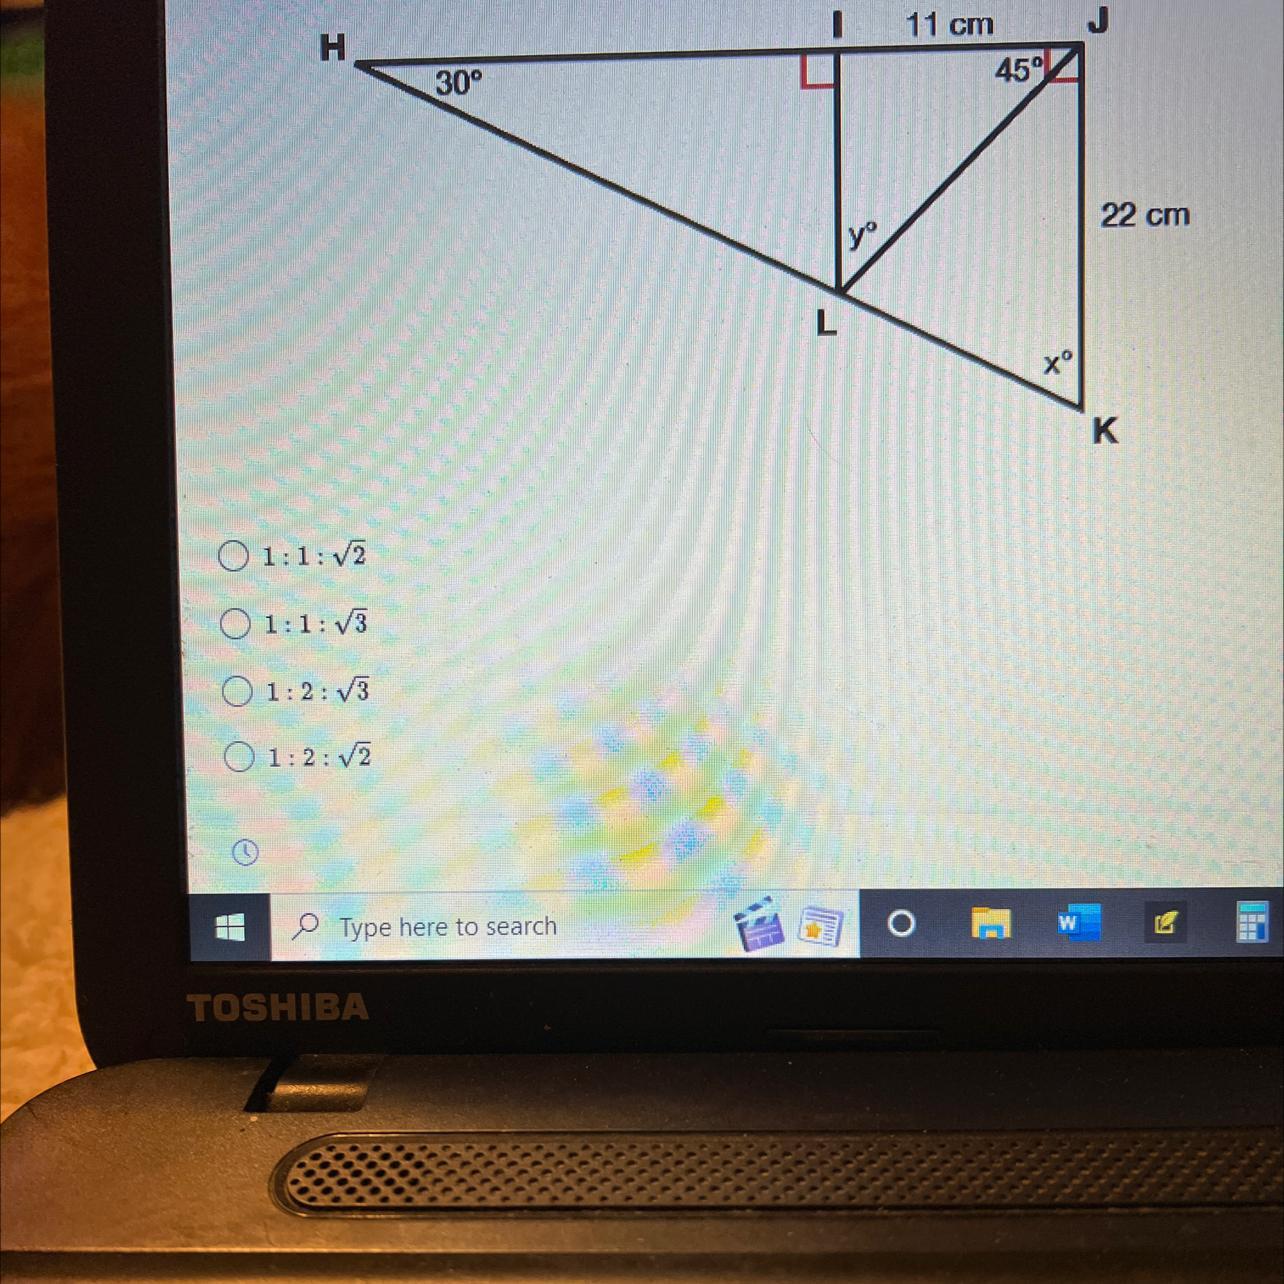 4. What Is The Ratio Of The Sides For Triangle HIL?